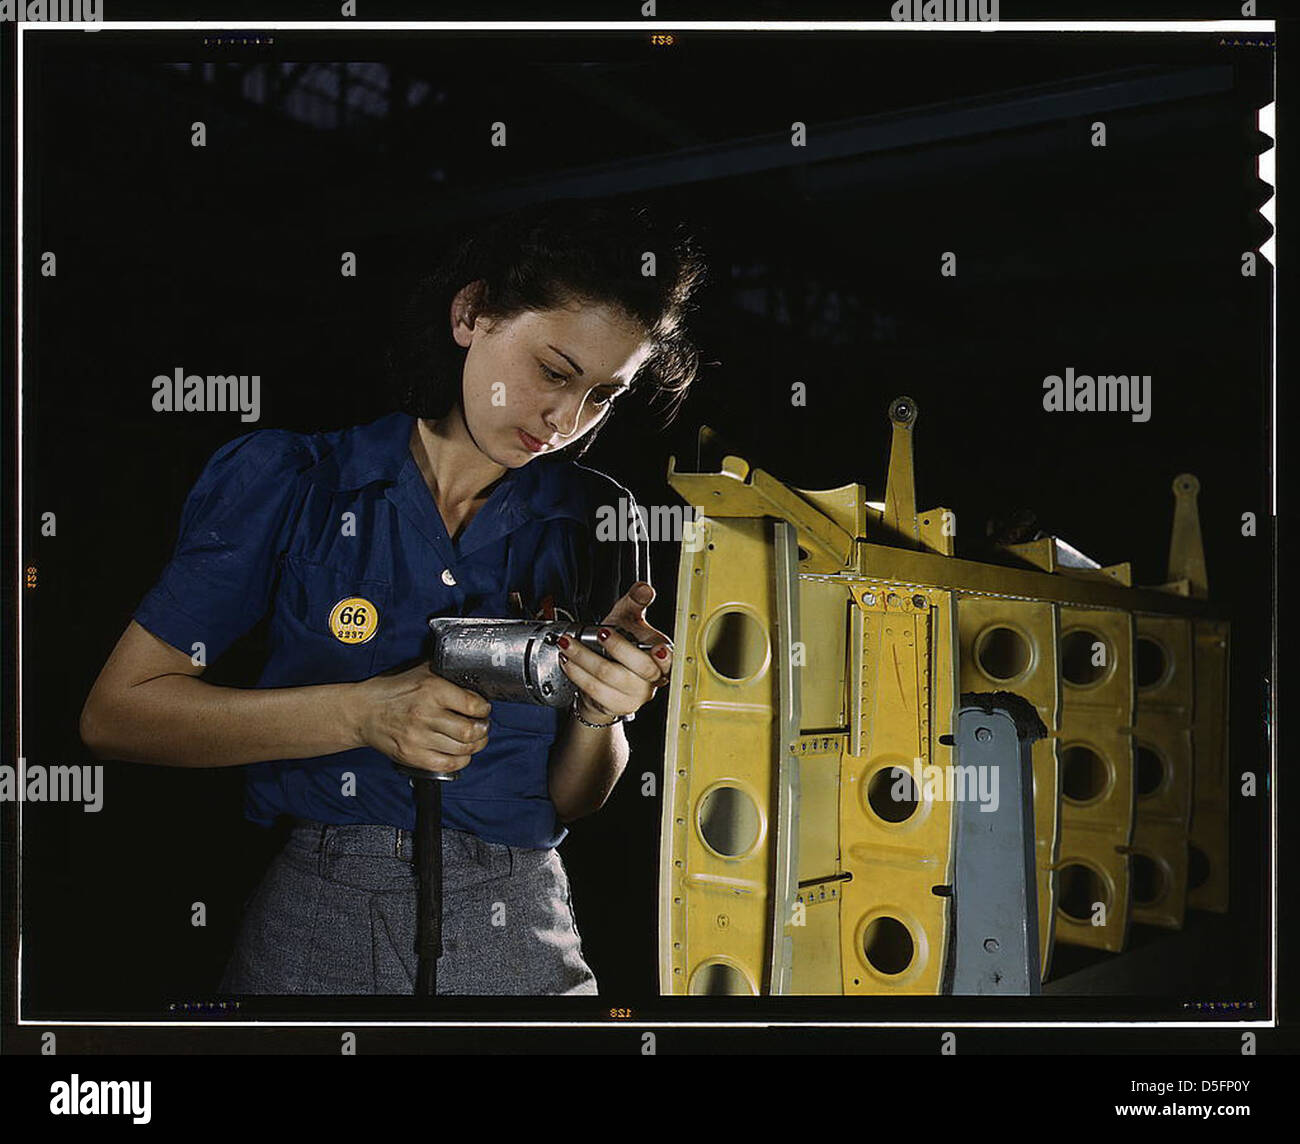 Drilling horizontal stabilizers: operating a hand drill, this woman worker at Vultee-Nashville is shown working on the horizontal stabilizer for a Vultee 'Vengeance' dive bomber, Tennessee. The 'Vengeance' (A-31) was originally designed for the French. It Stock Photo